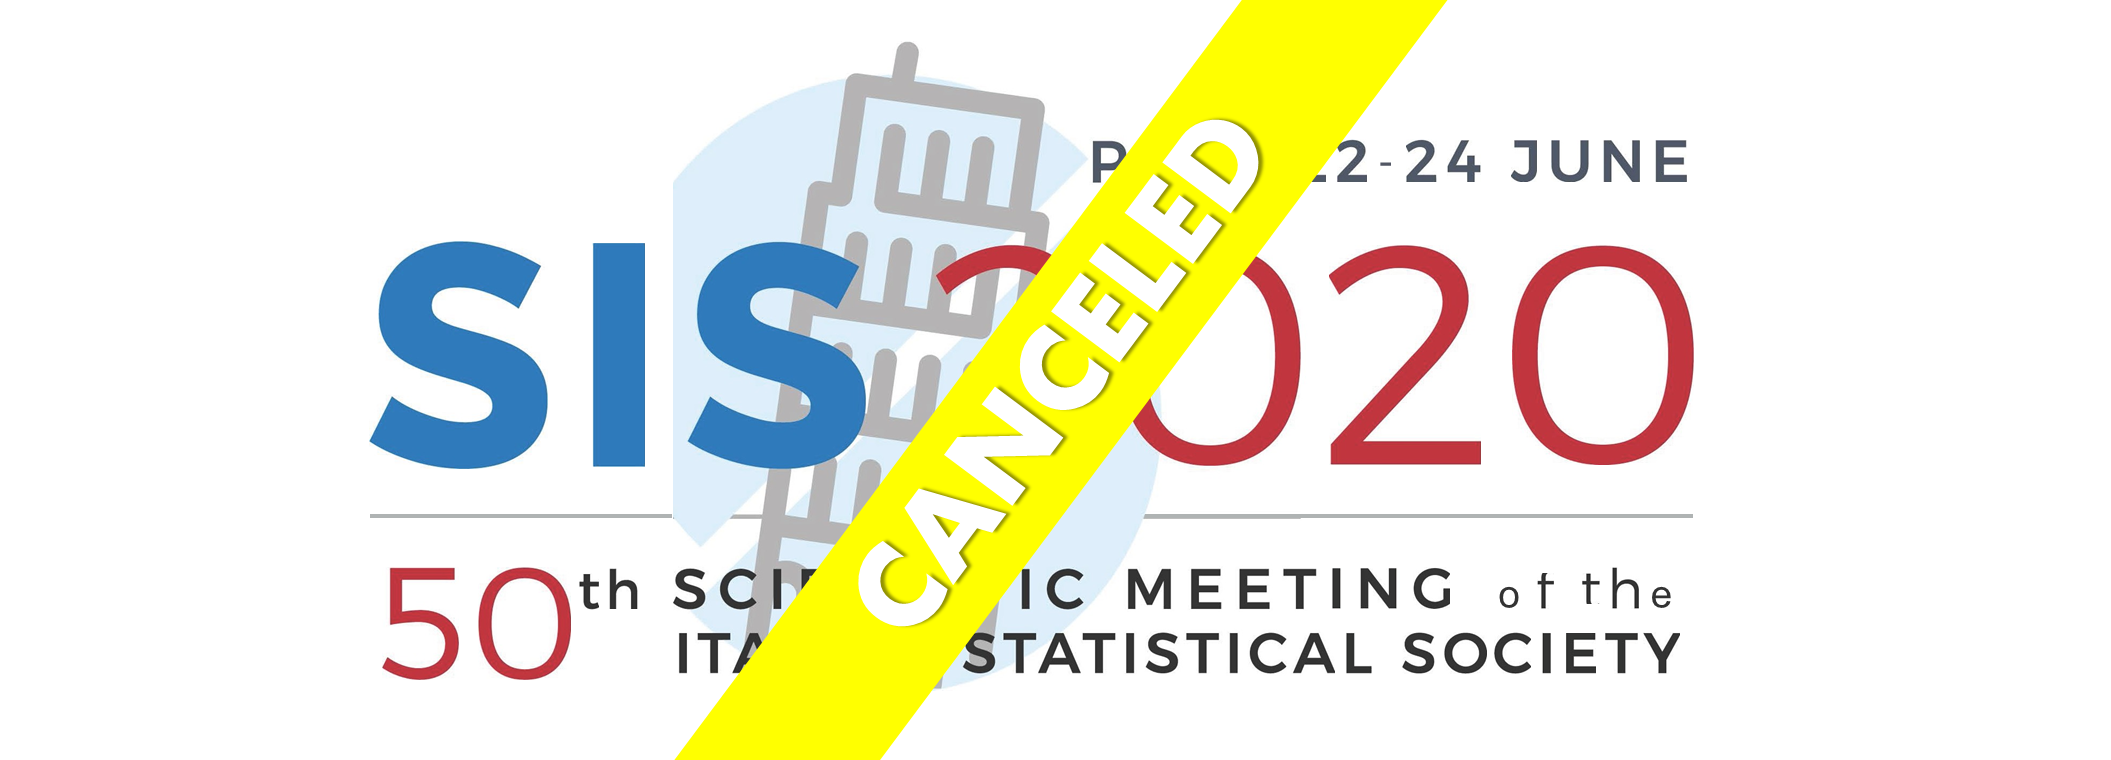 SIS 2020 - 49th Scientific meeting of the Italian Statistical Society